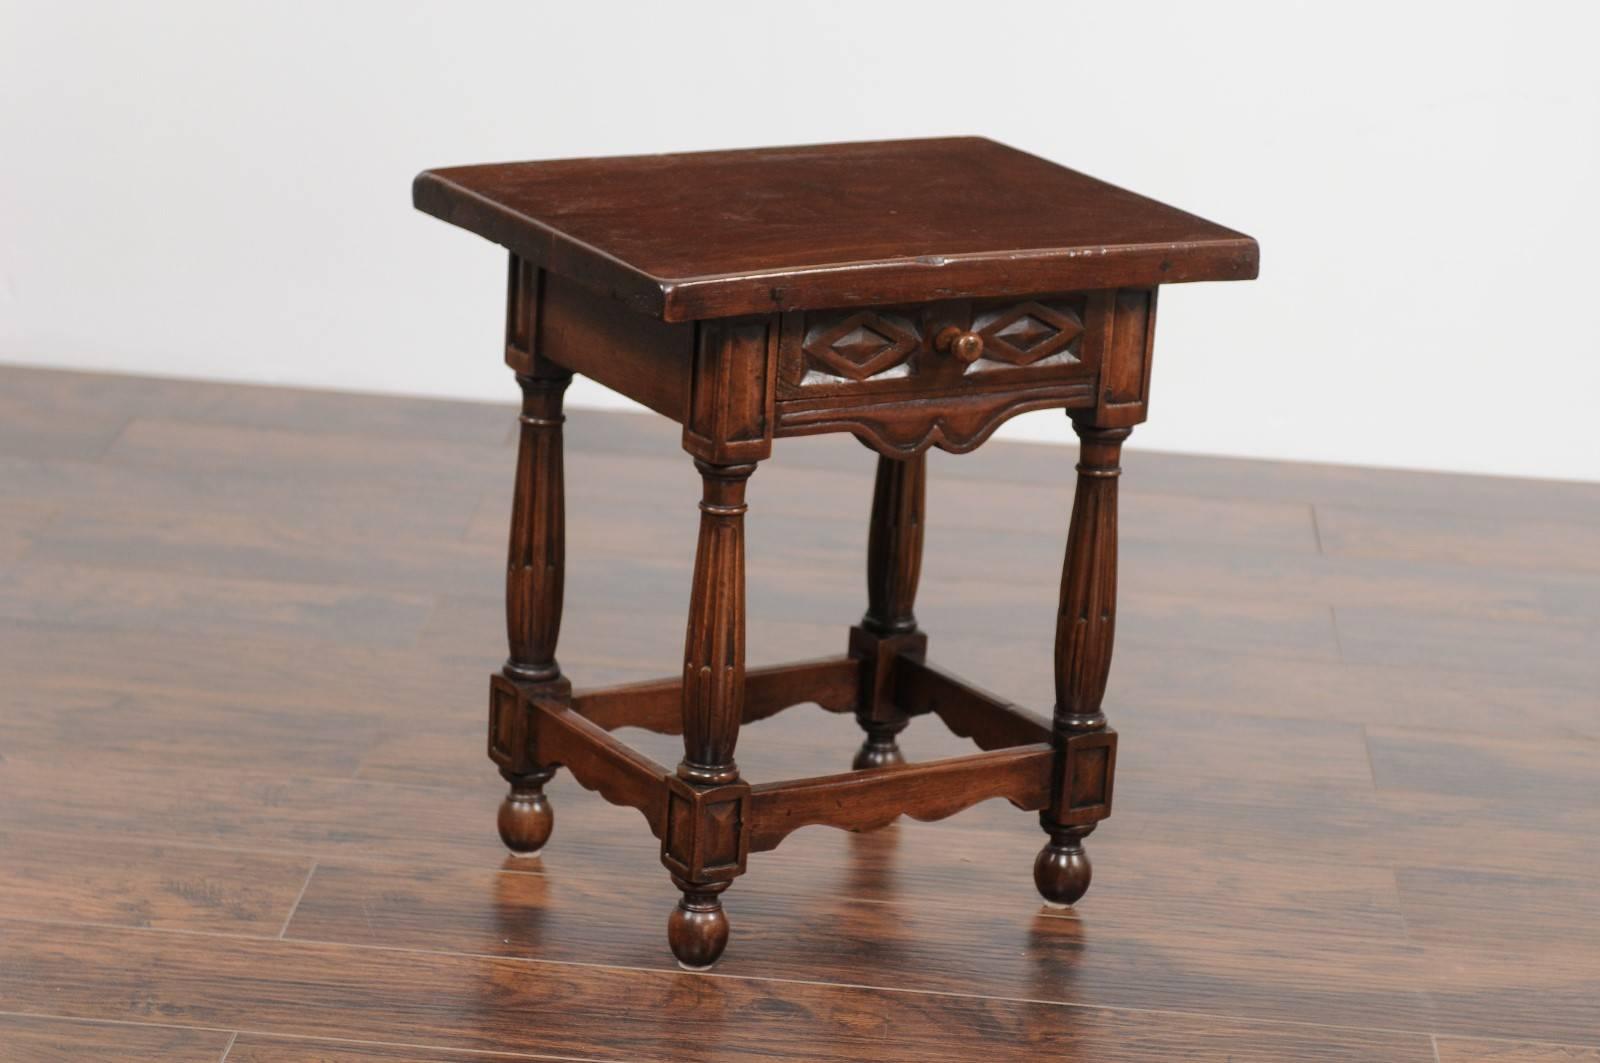 An Italian petite carved walnut side table with single drawer, geometrical motifs, unusual fluted legs and side stretchers from the second half of the 19th century. This Italian walnut side table features a rectangular top sitting above a single